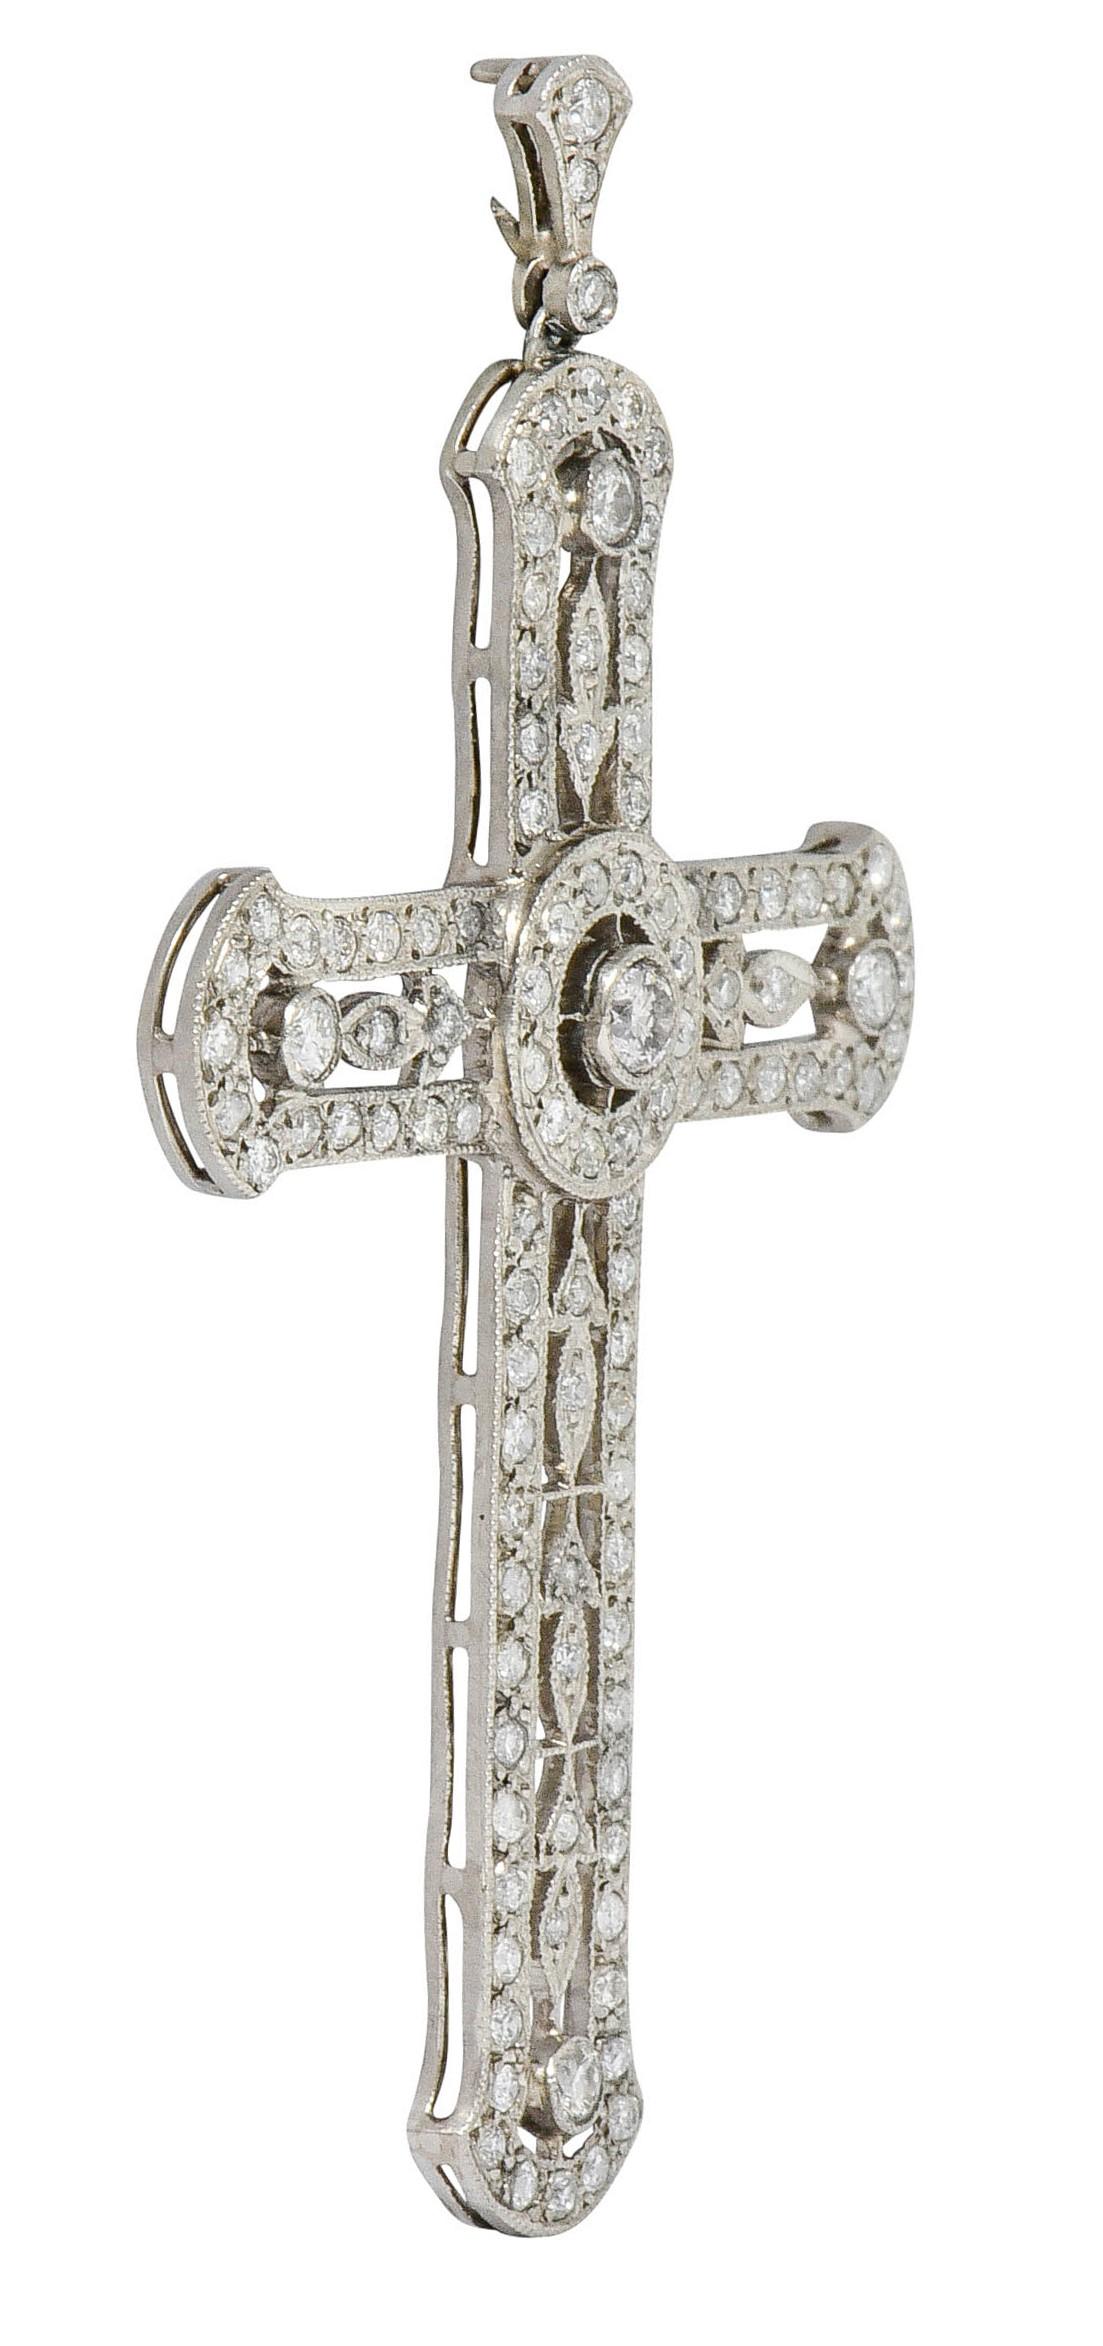 Large cross pendant features a circular center with pierced foliate details accented by milgrain

Set throughout by round brilliant and transitional cut diamonds; bead and bezel set

Weighing in total approximately 2.05 carats with H to K color and